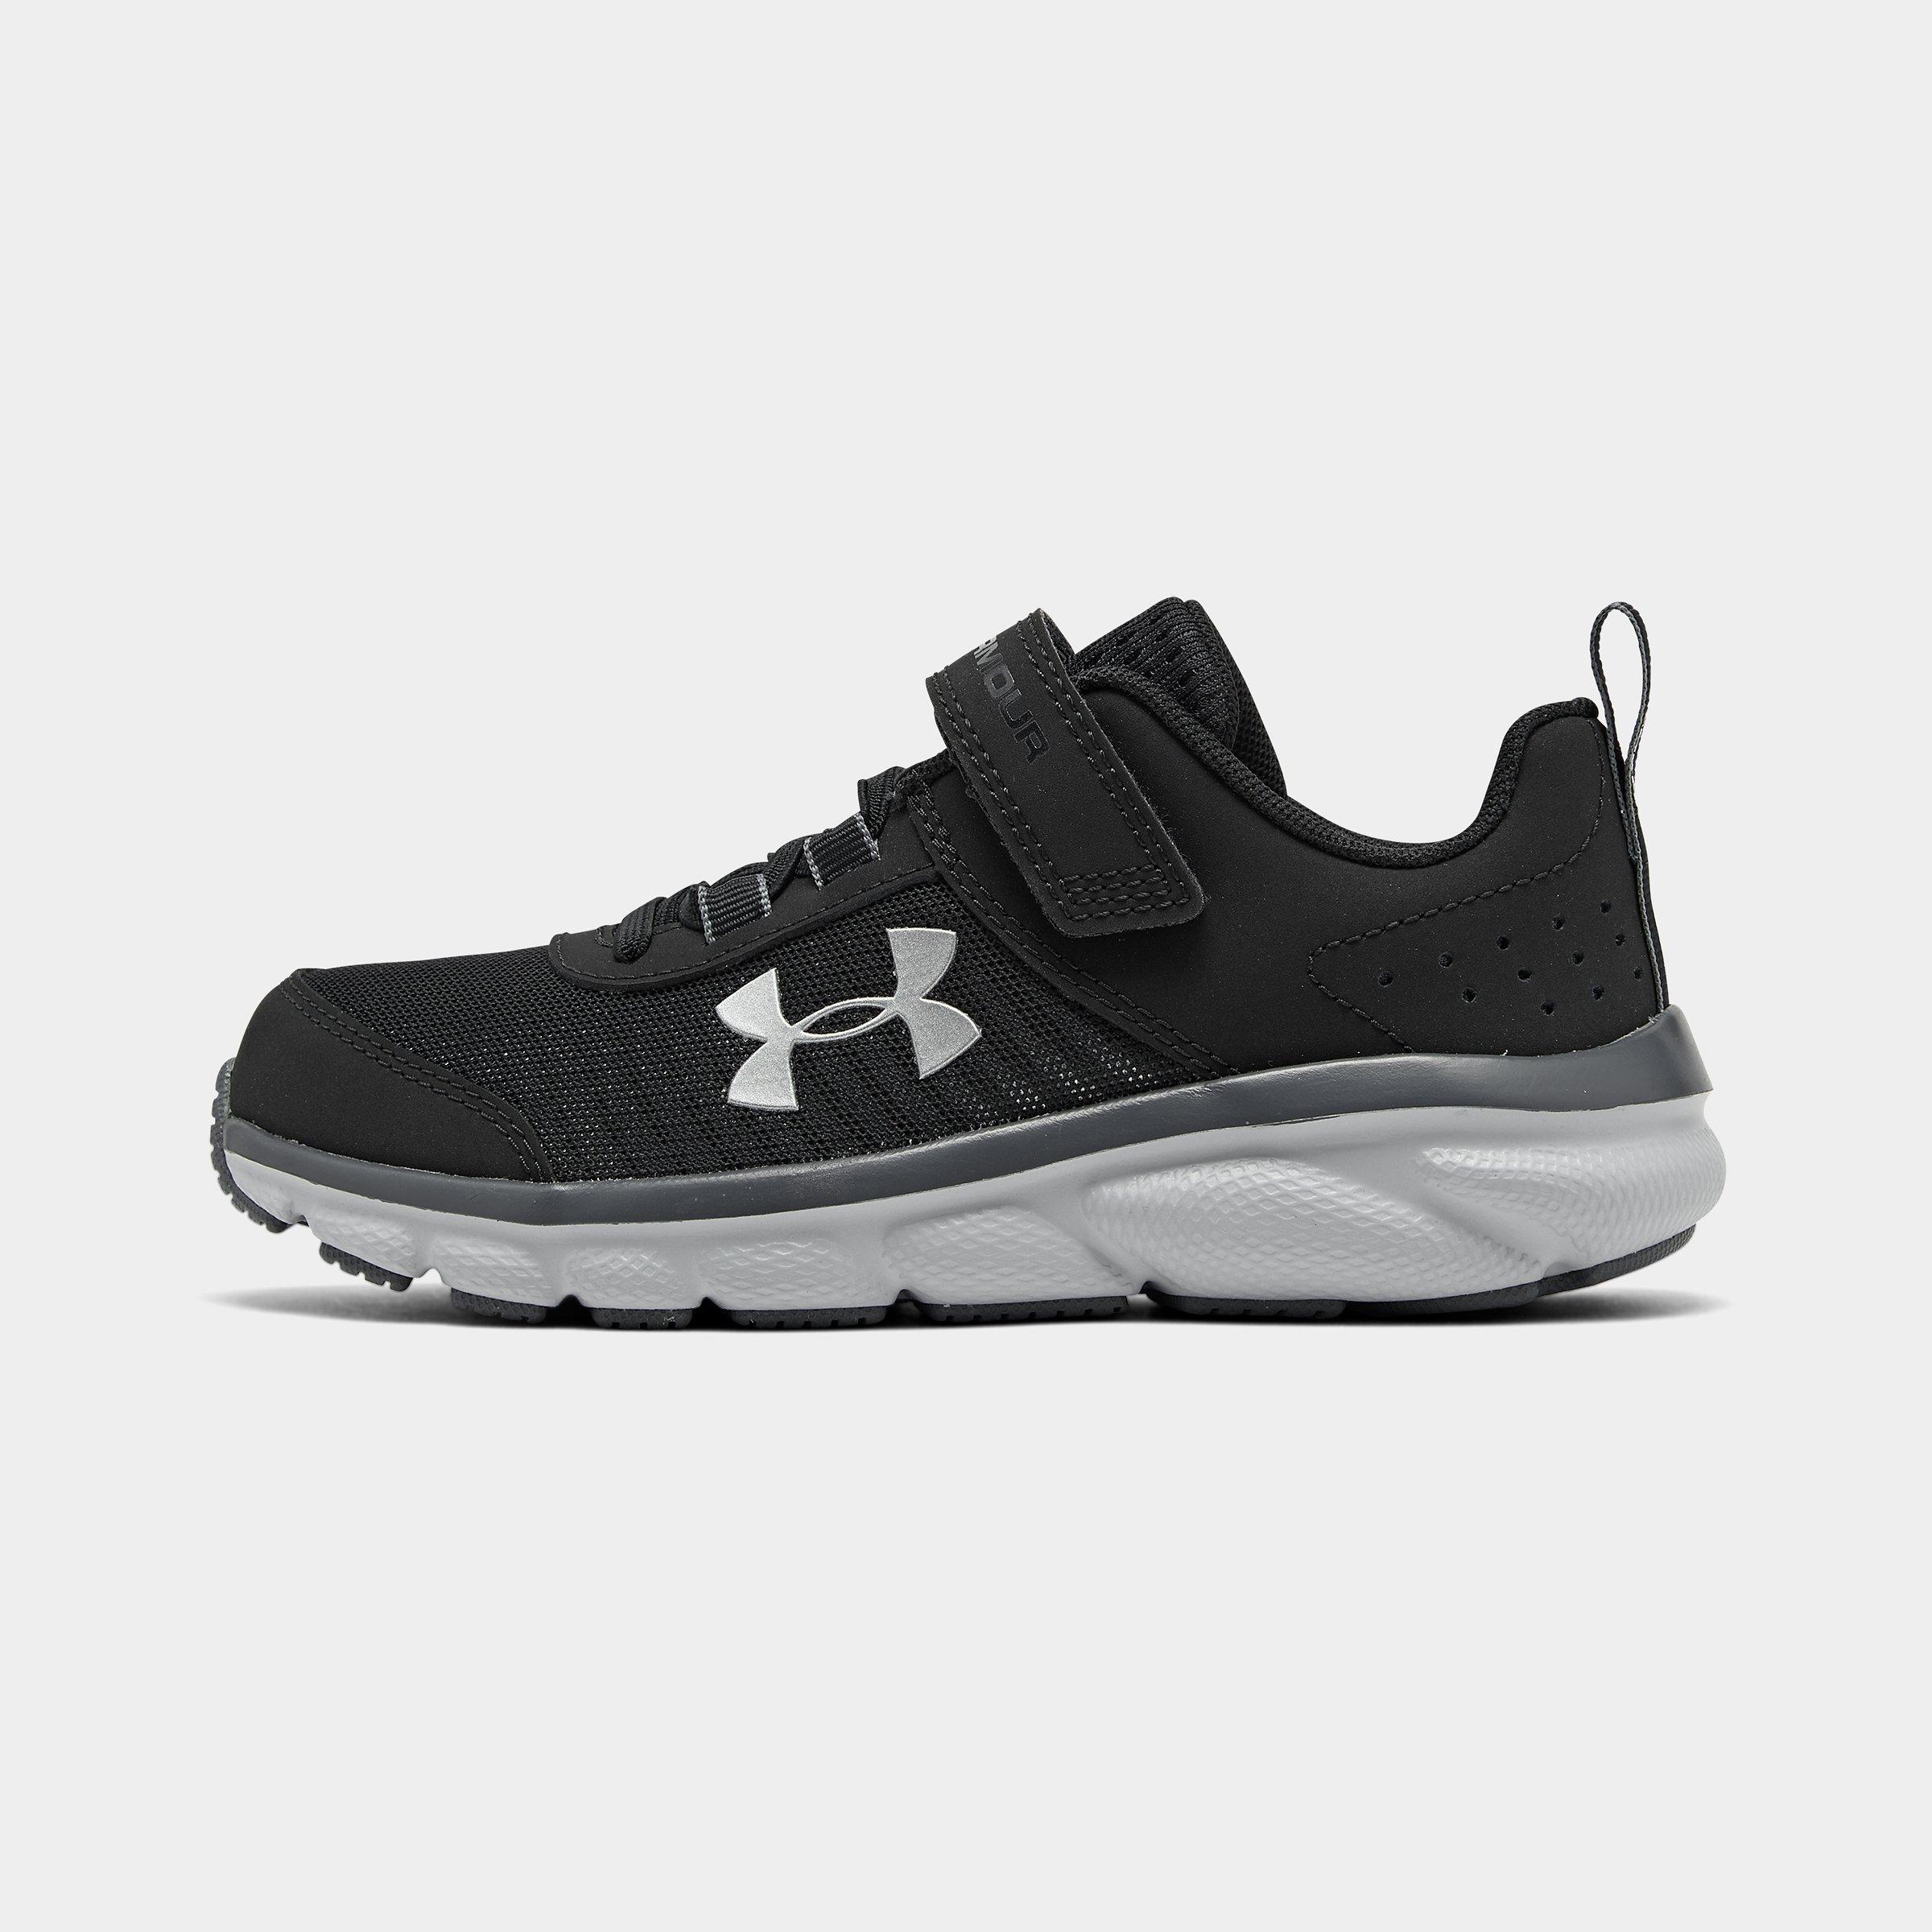 finish line under armour shoes